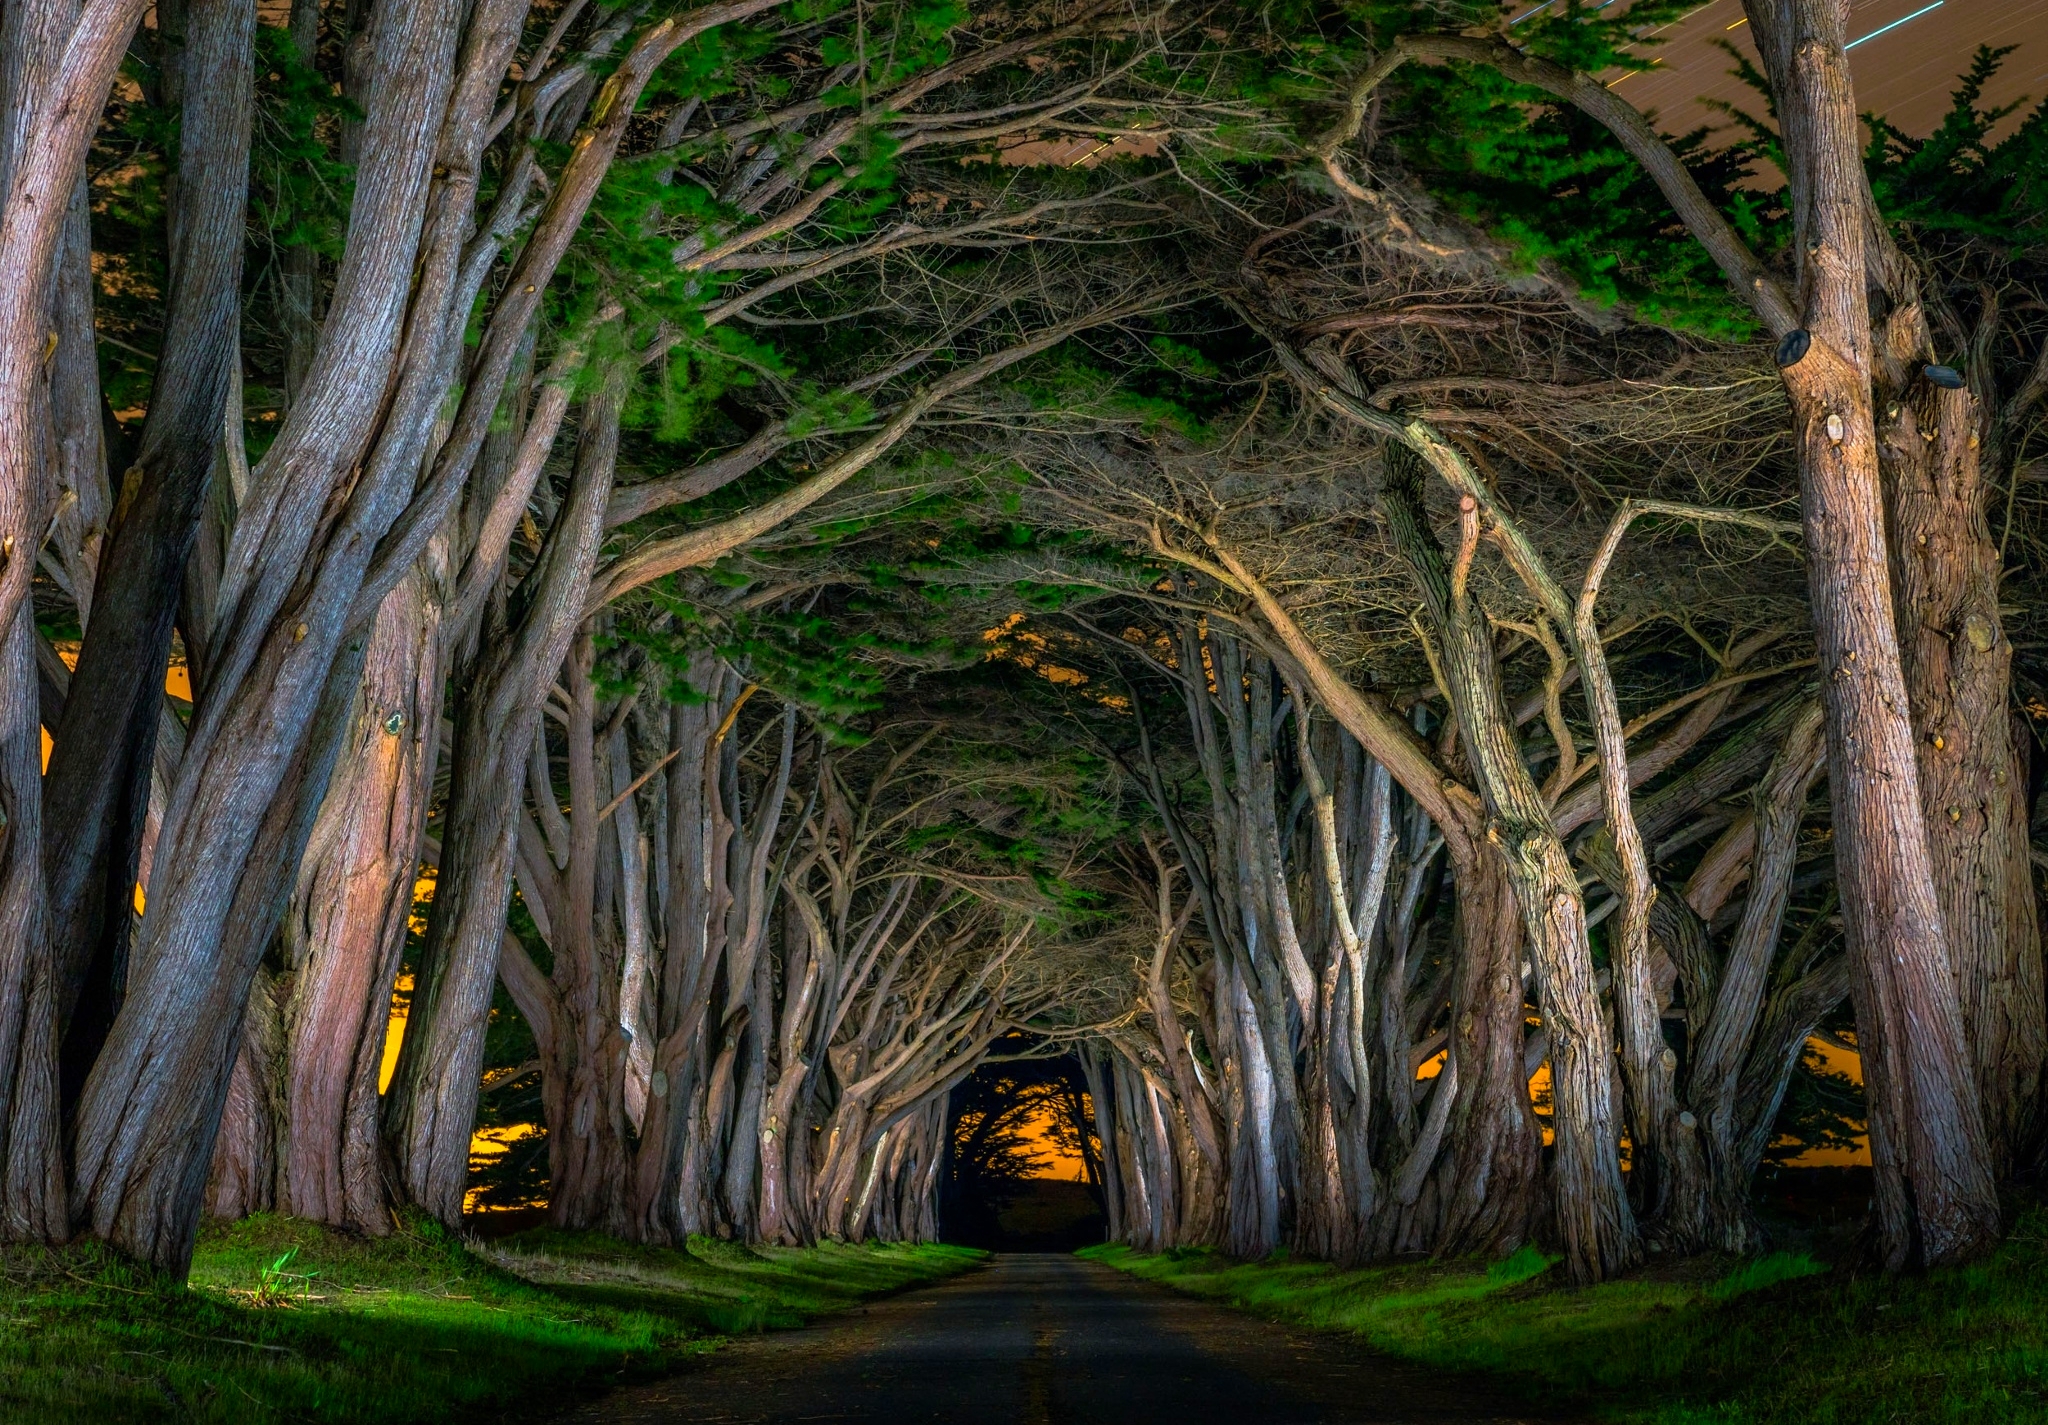 Tree Canopy over Road